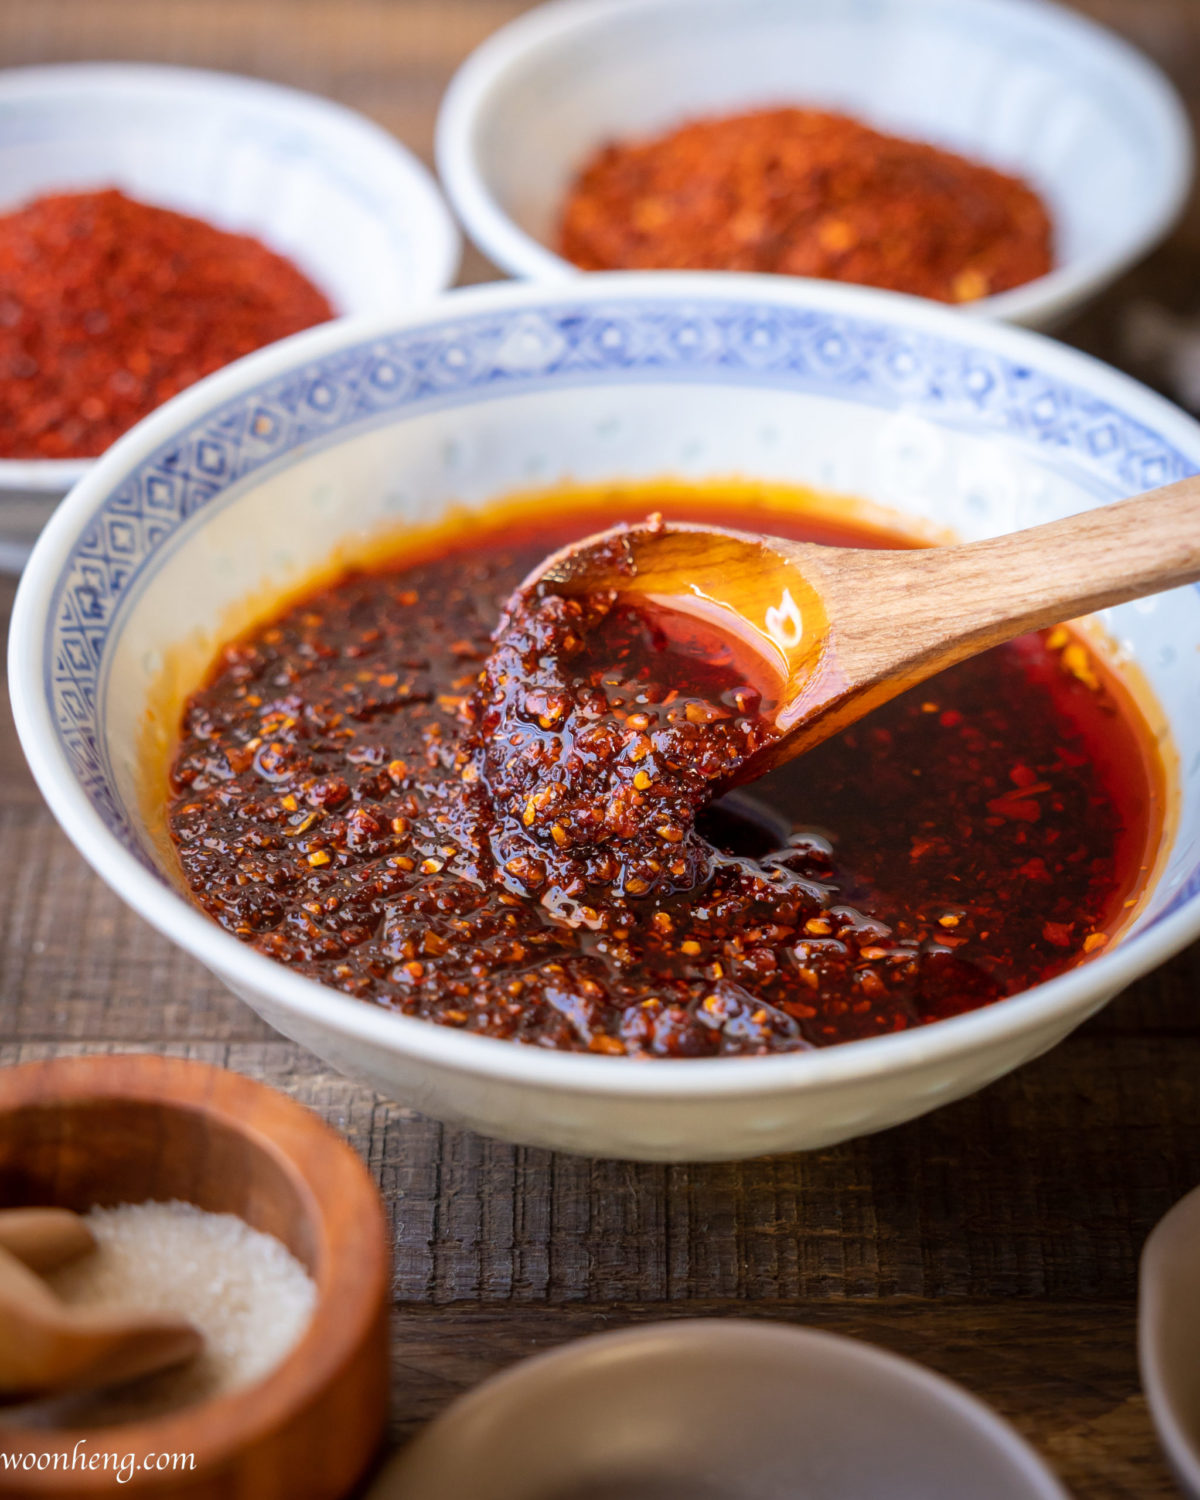 How to make Chili Oil from Food Scraps - WoonHeng